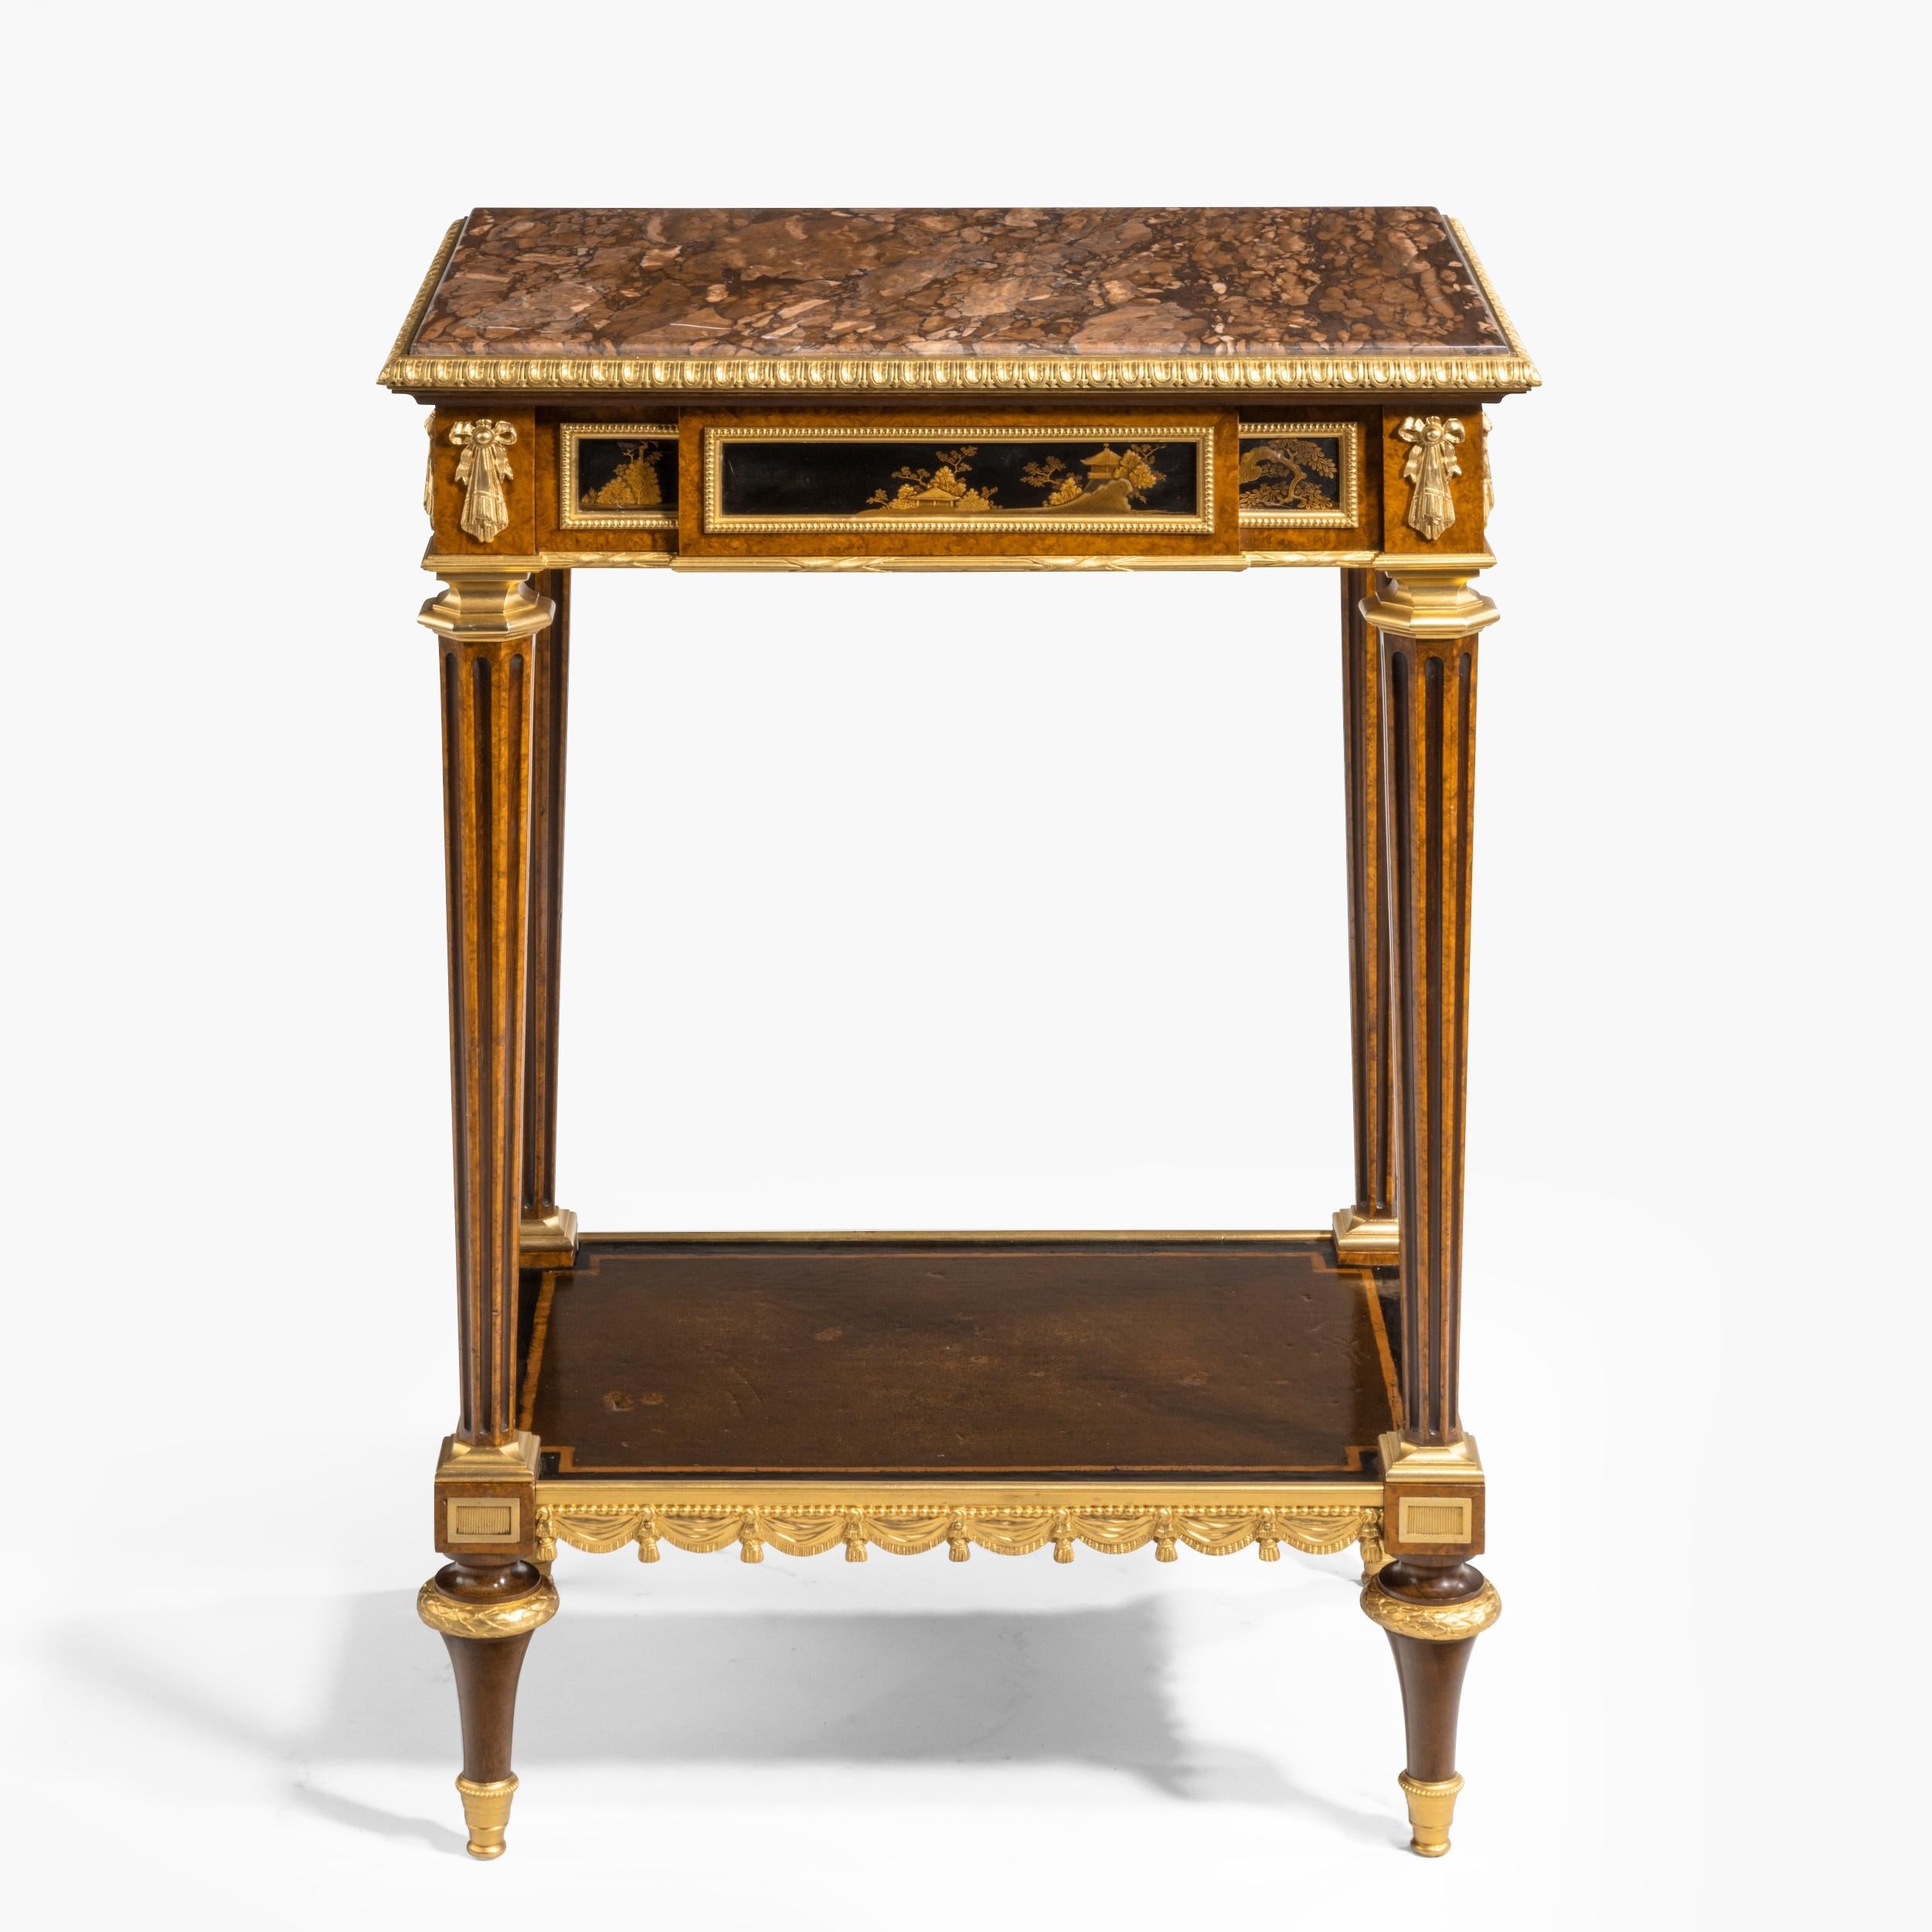 A fine side table in the Louis XVI Manner
By Henry Dasson

Of rectangular form, constructed in amboyna and mahogany dressed with chinoiserie panels, and fine ormolu mounts; rising from ormolu-mounted toupie feet, supporting the lower platform,